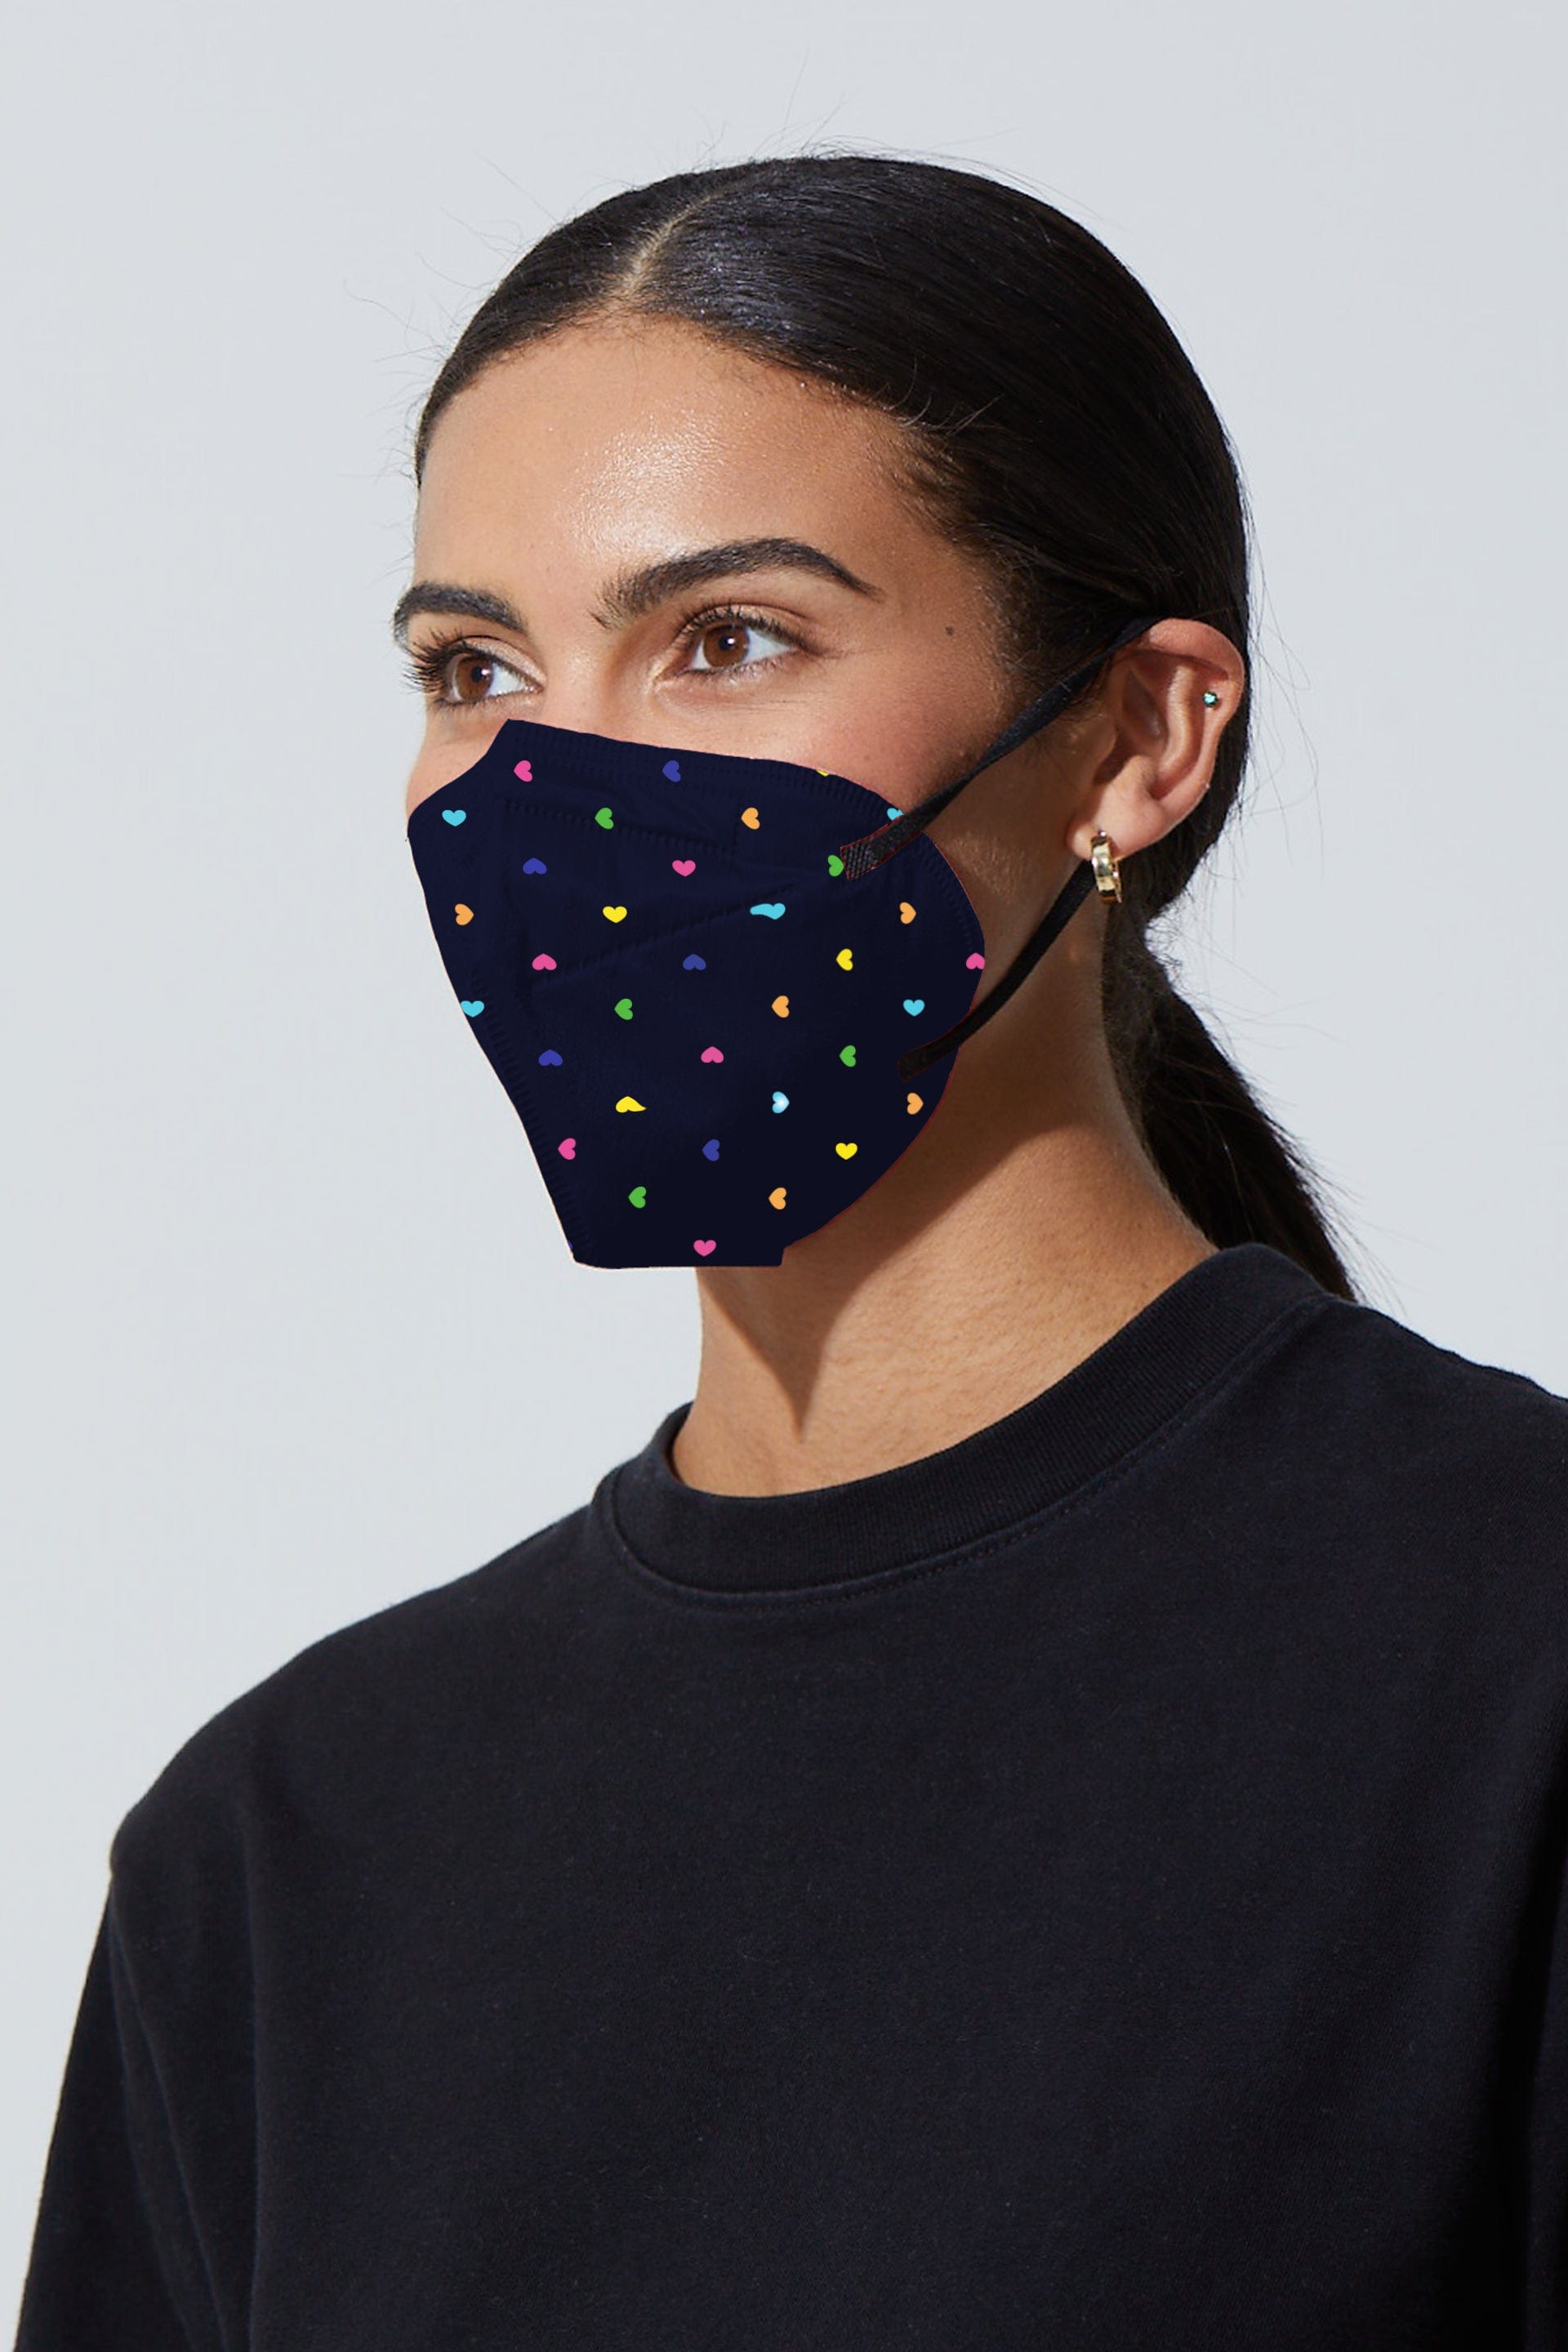 Woman wearing stylish Dark Navy KN95 face mask with colorful printed hearts, with high quality breathable fabric. 